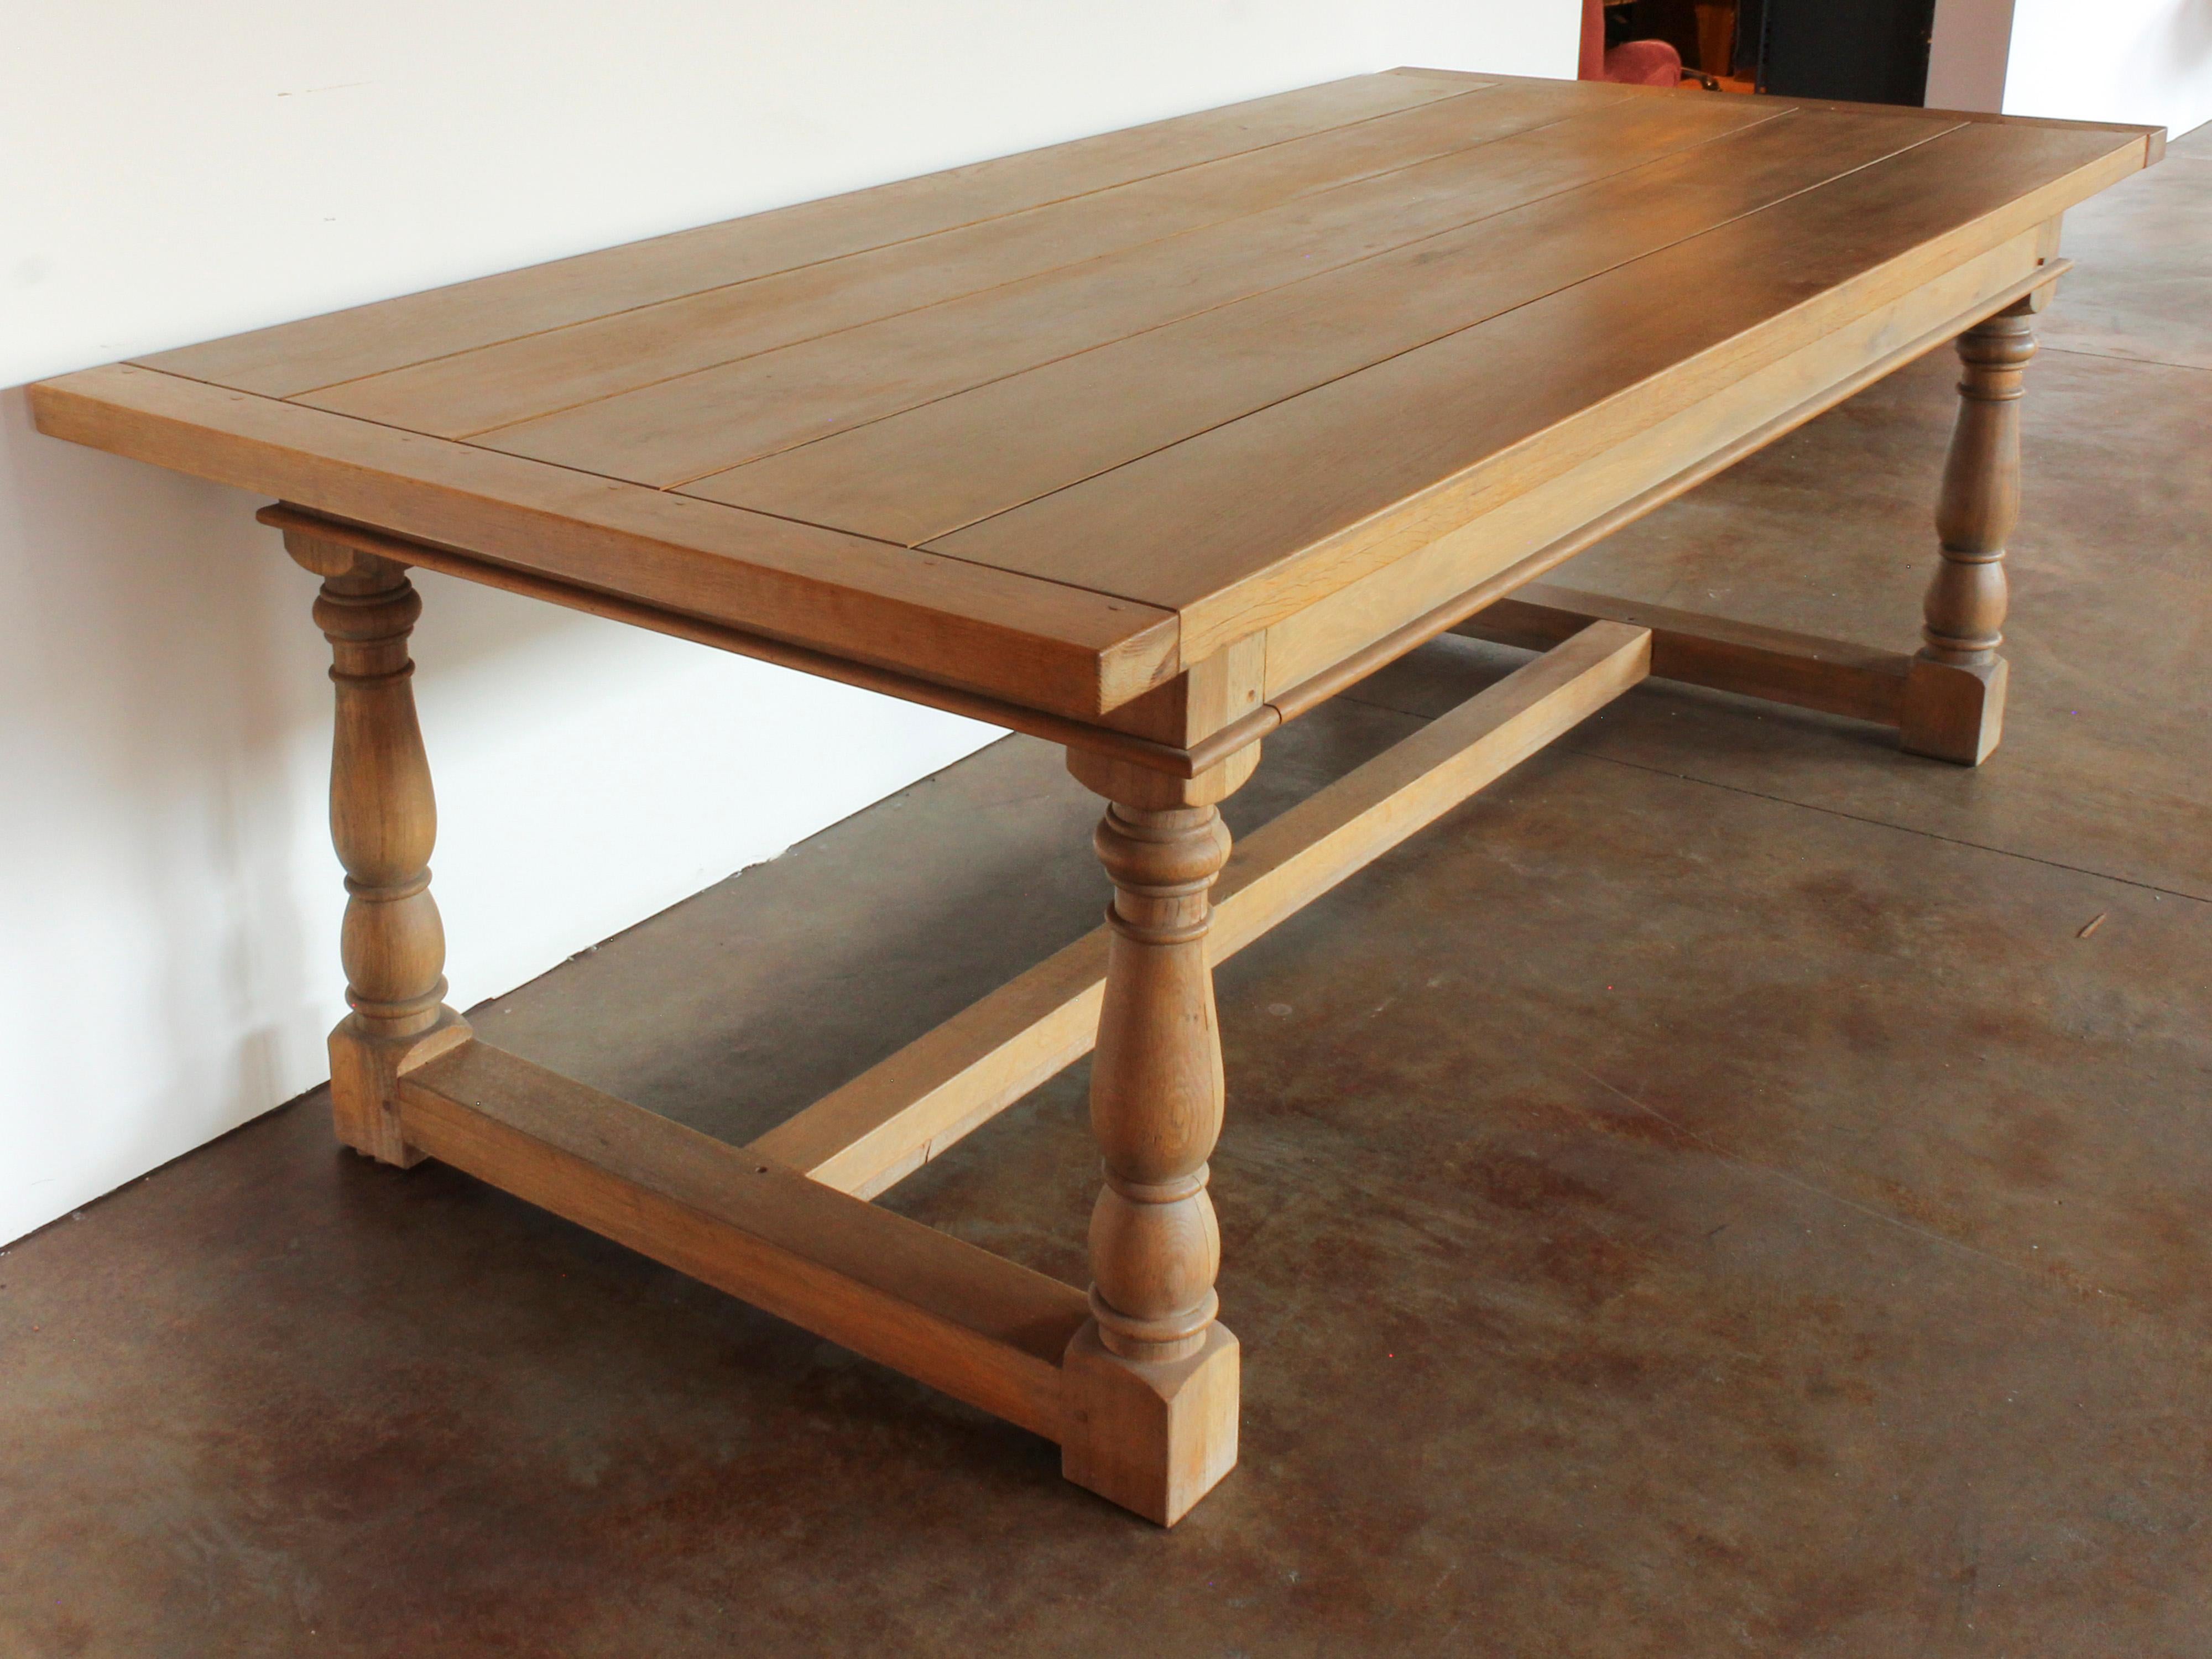 Large custom oak plank-top dining table with carved spindle legs and stretchers. Custom made by Old Plank Road in Chicago exclusively for Nate Berkus Associates. Two tables available.